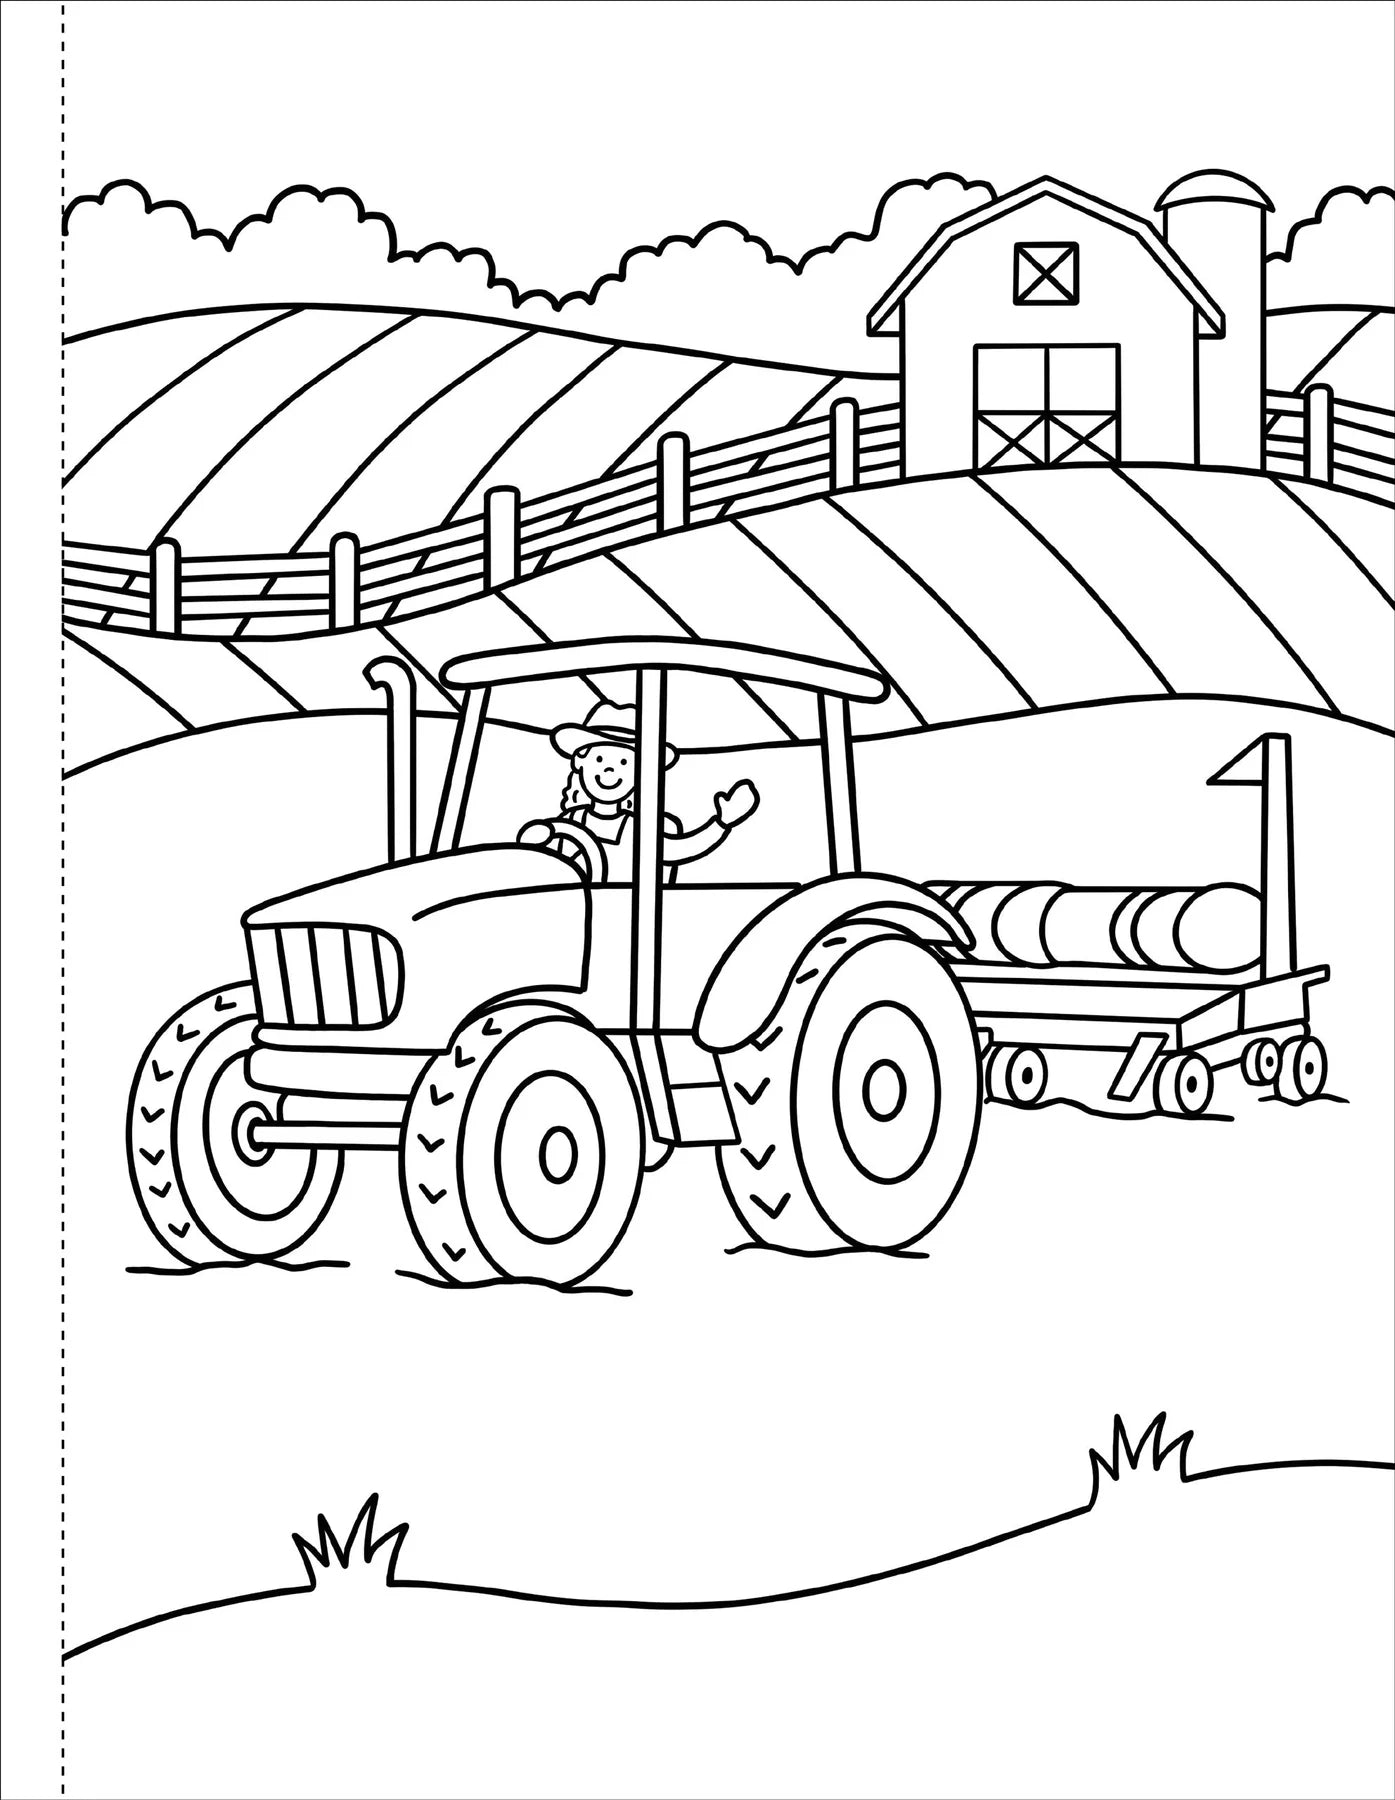 My First Coloring Book! On the Farm!